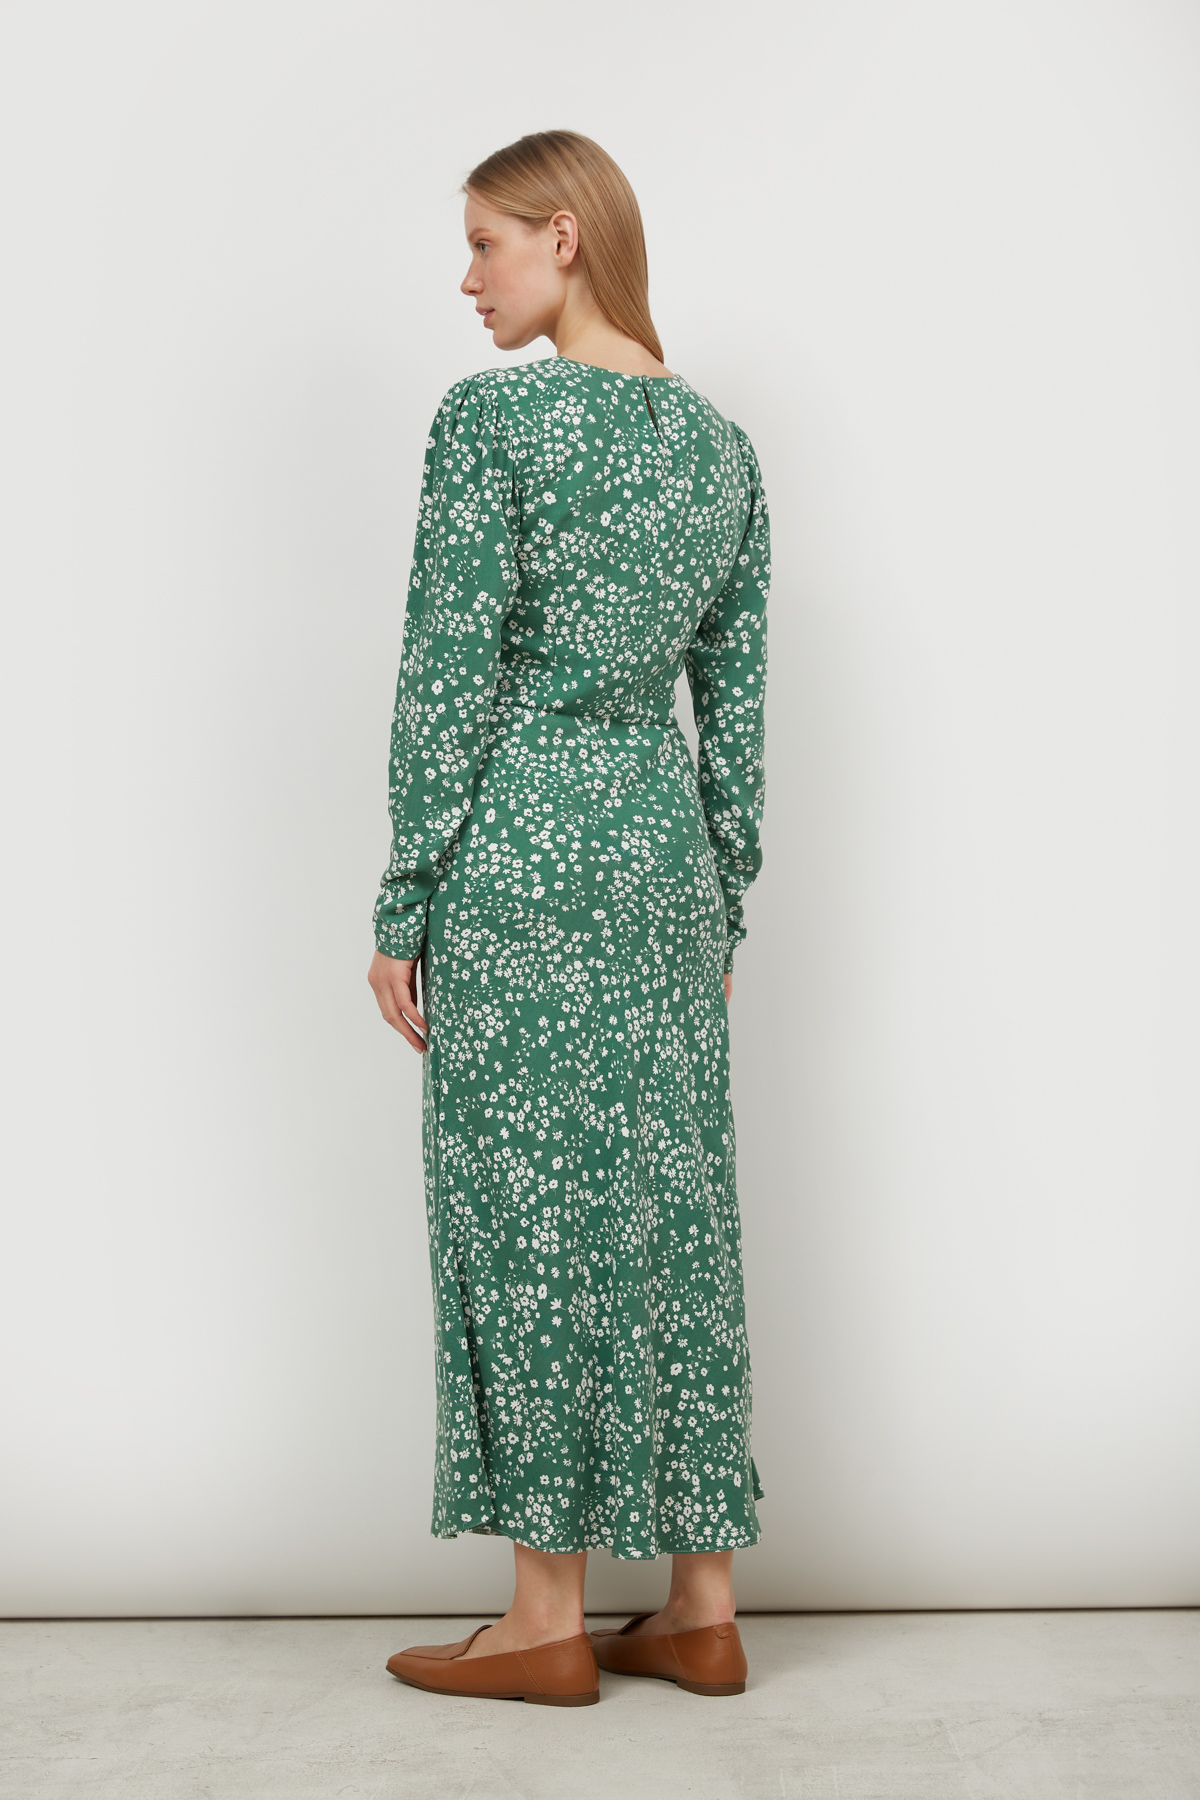 Dress with viscose green in flowers print, photo 4